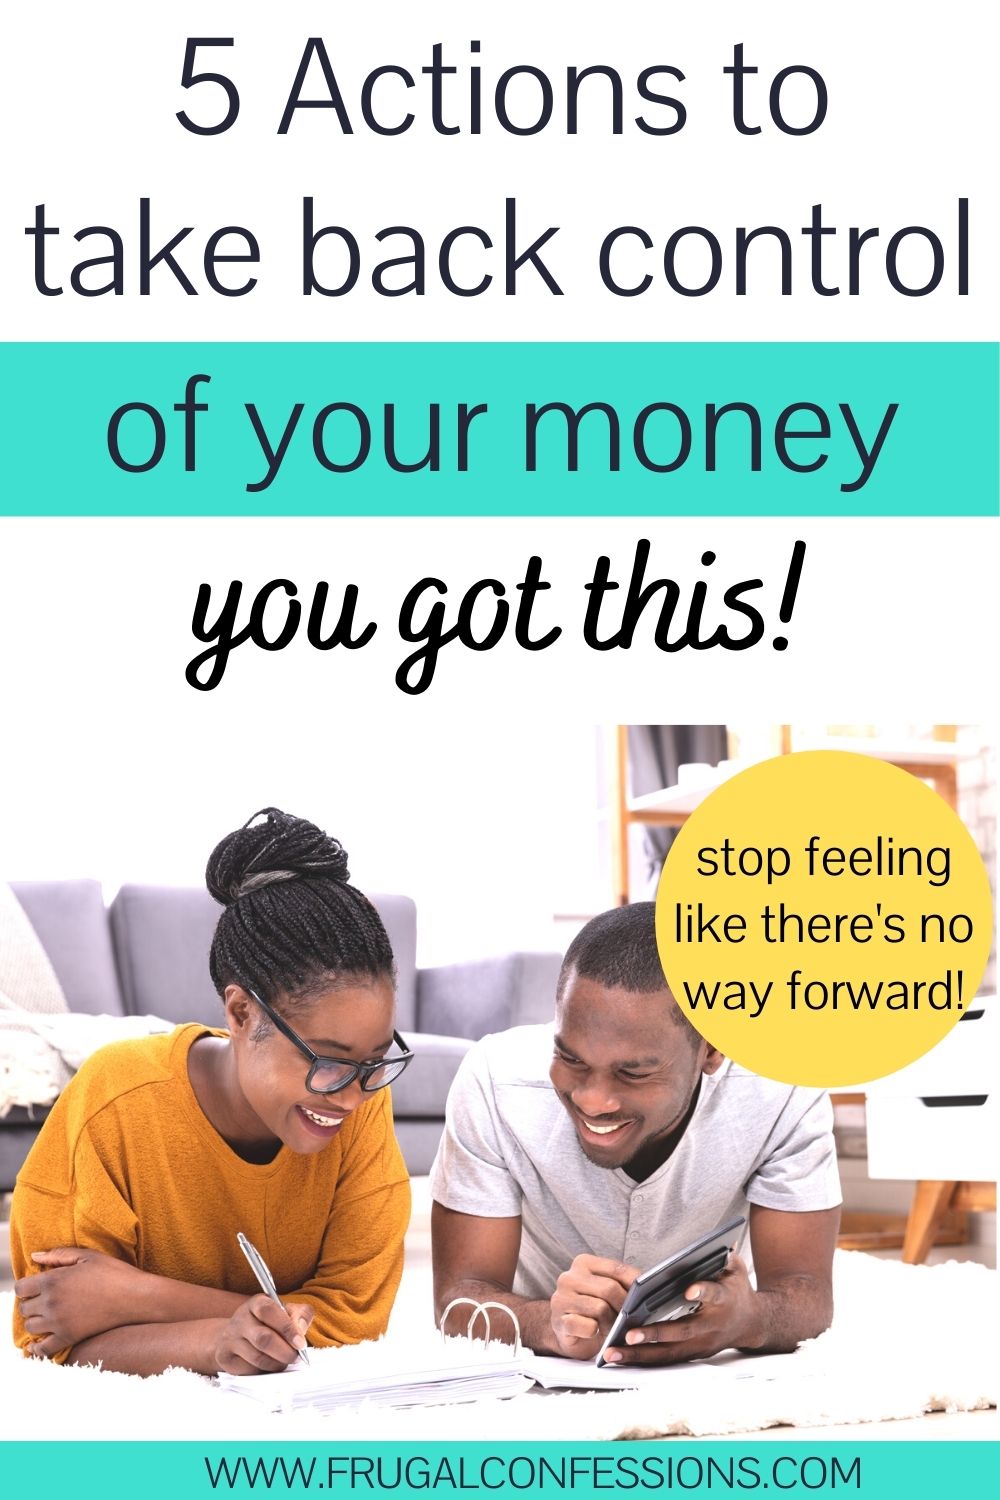 couple on floor, smiling, working on finances together, text overlay "5 actions to take back control of your money - you've got this!"